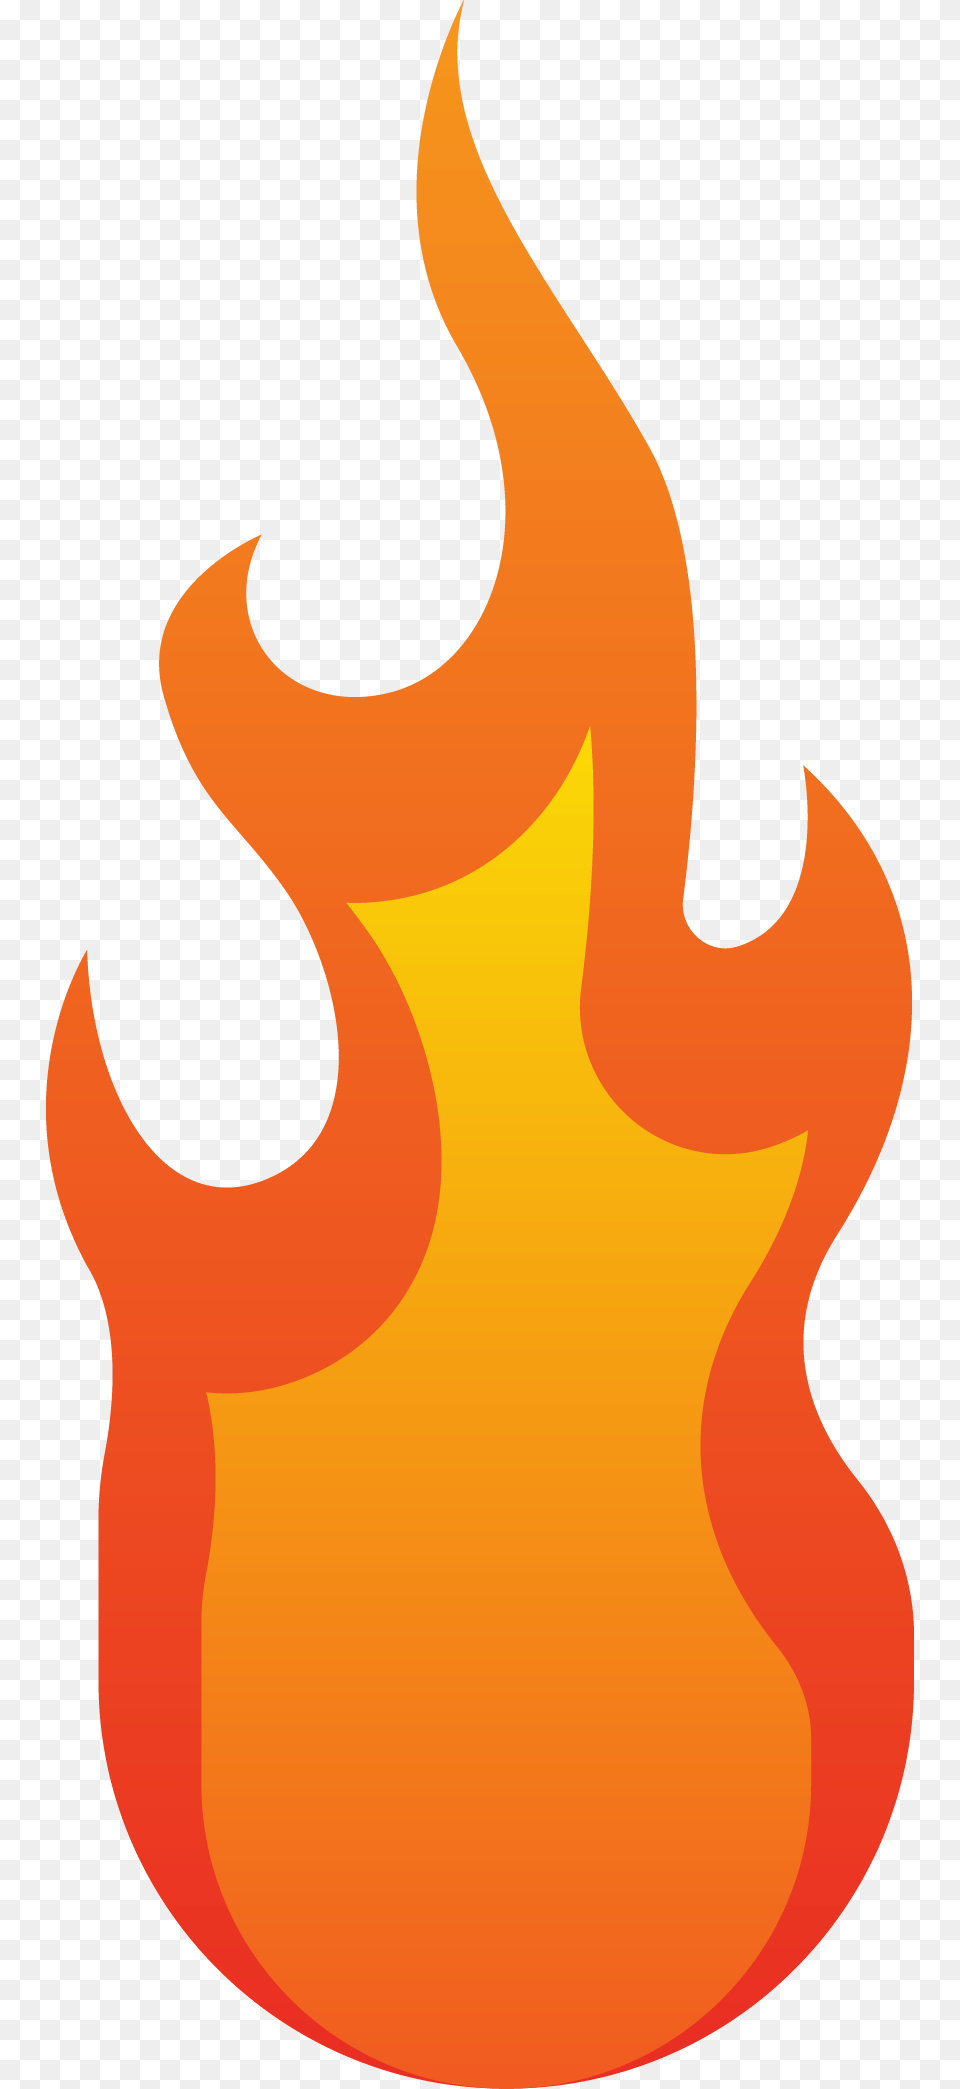 Fire Flame Combustion Combustion Cartoon Transparent Gif, Animal, Fish, Sea Life, Shark Png Image